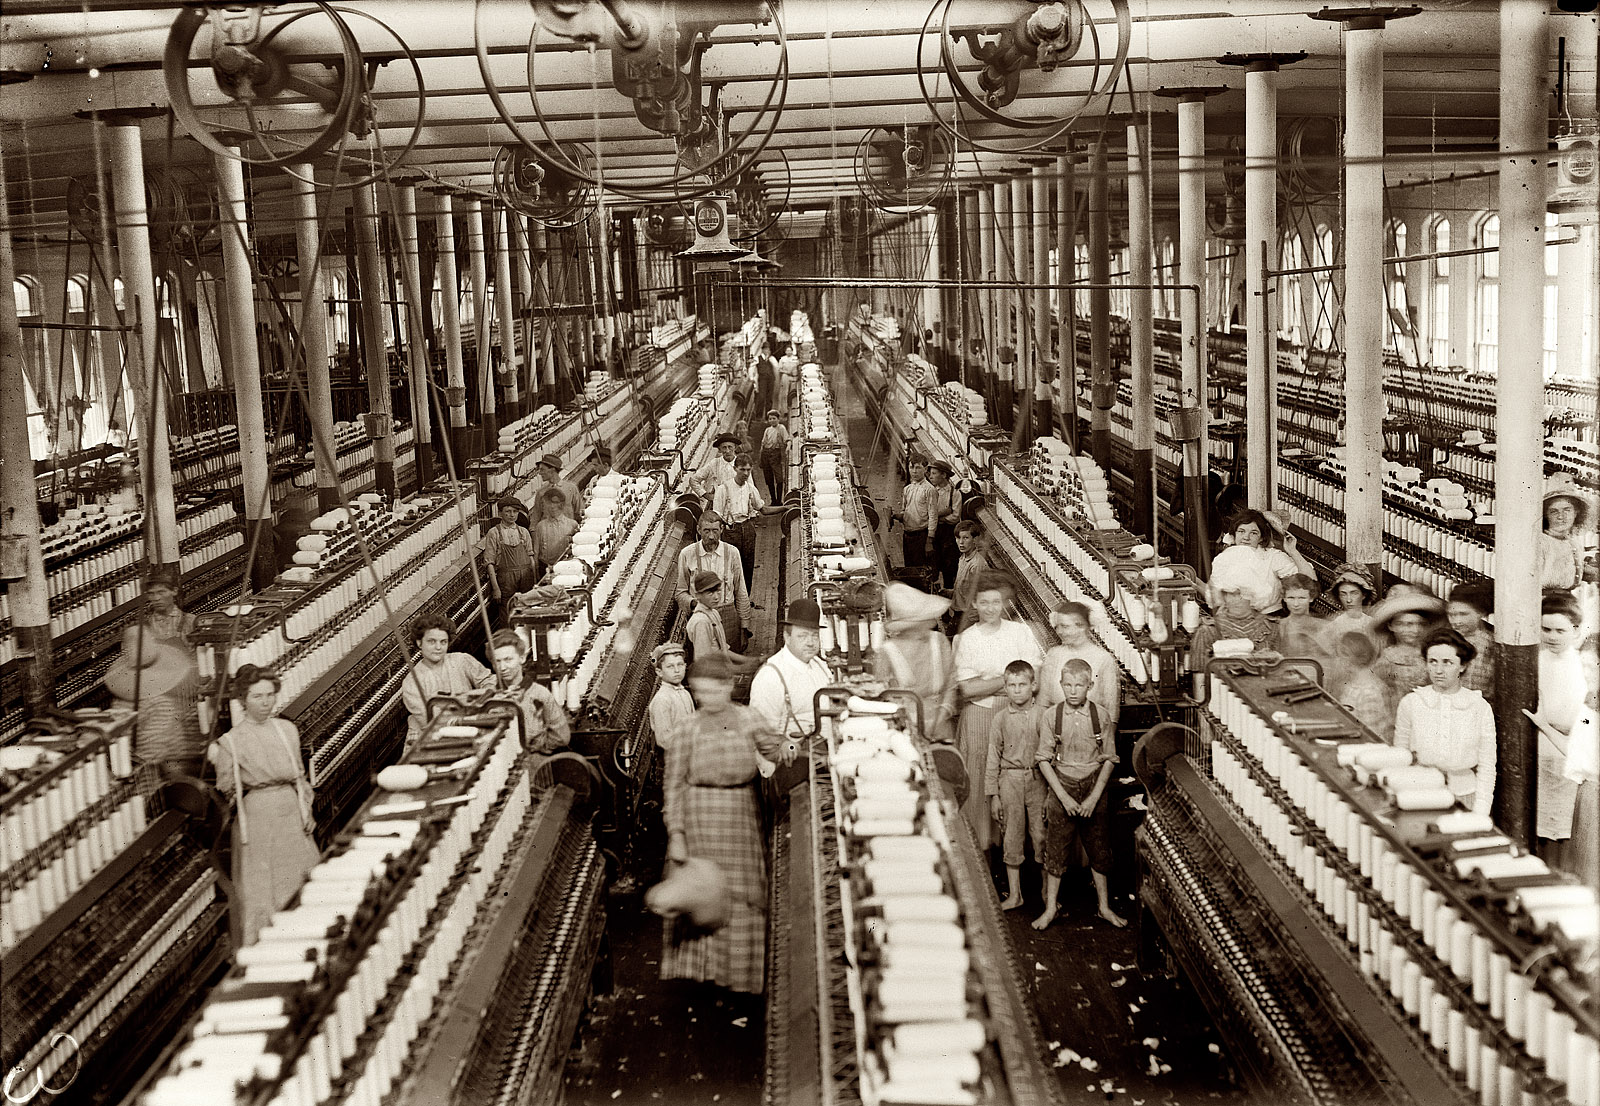 March 1911. Magnolia, Mississippi. "Magnolia Cotton Mills spinning room. See the little ones scattered through the mill. All work." View full size. Photograph (original glass negative) and caption by Lewis Wickes Hine.